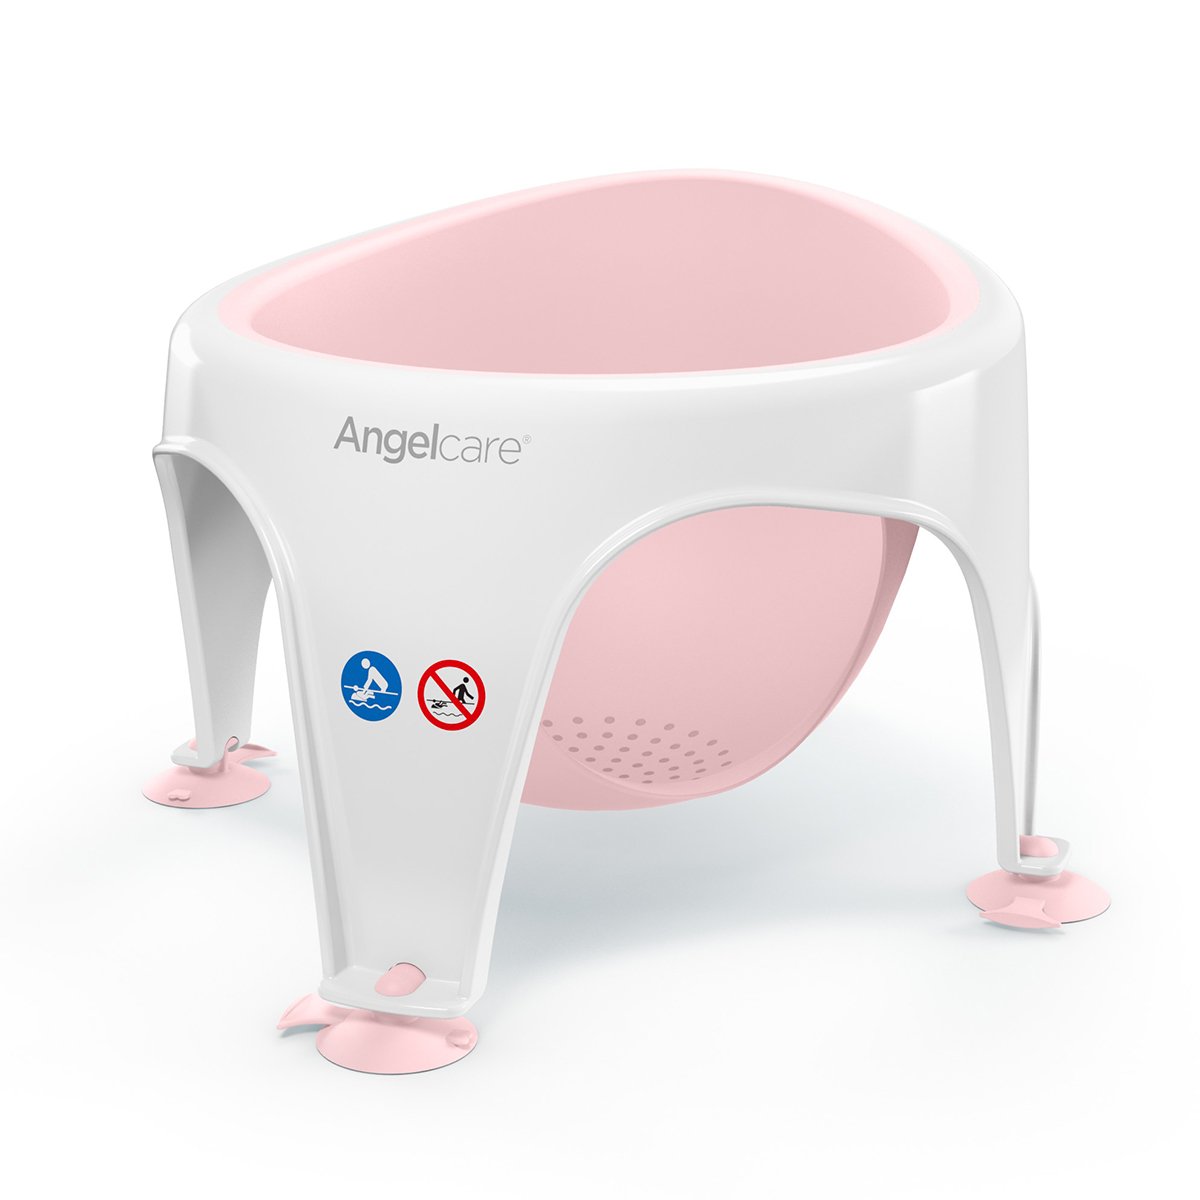 Angelcare AC587 Baby Bath Soft Touch Ring Seat - Pink 2